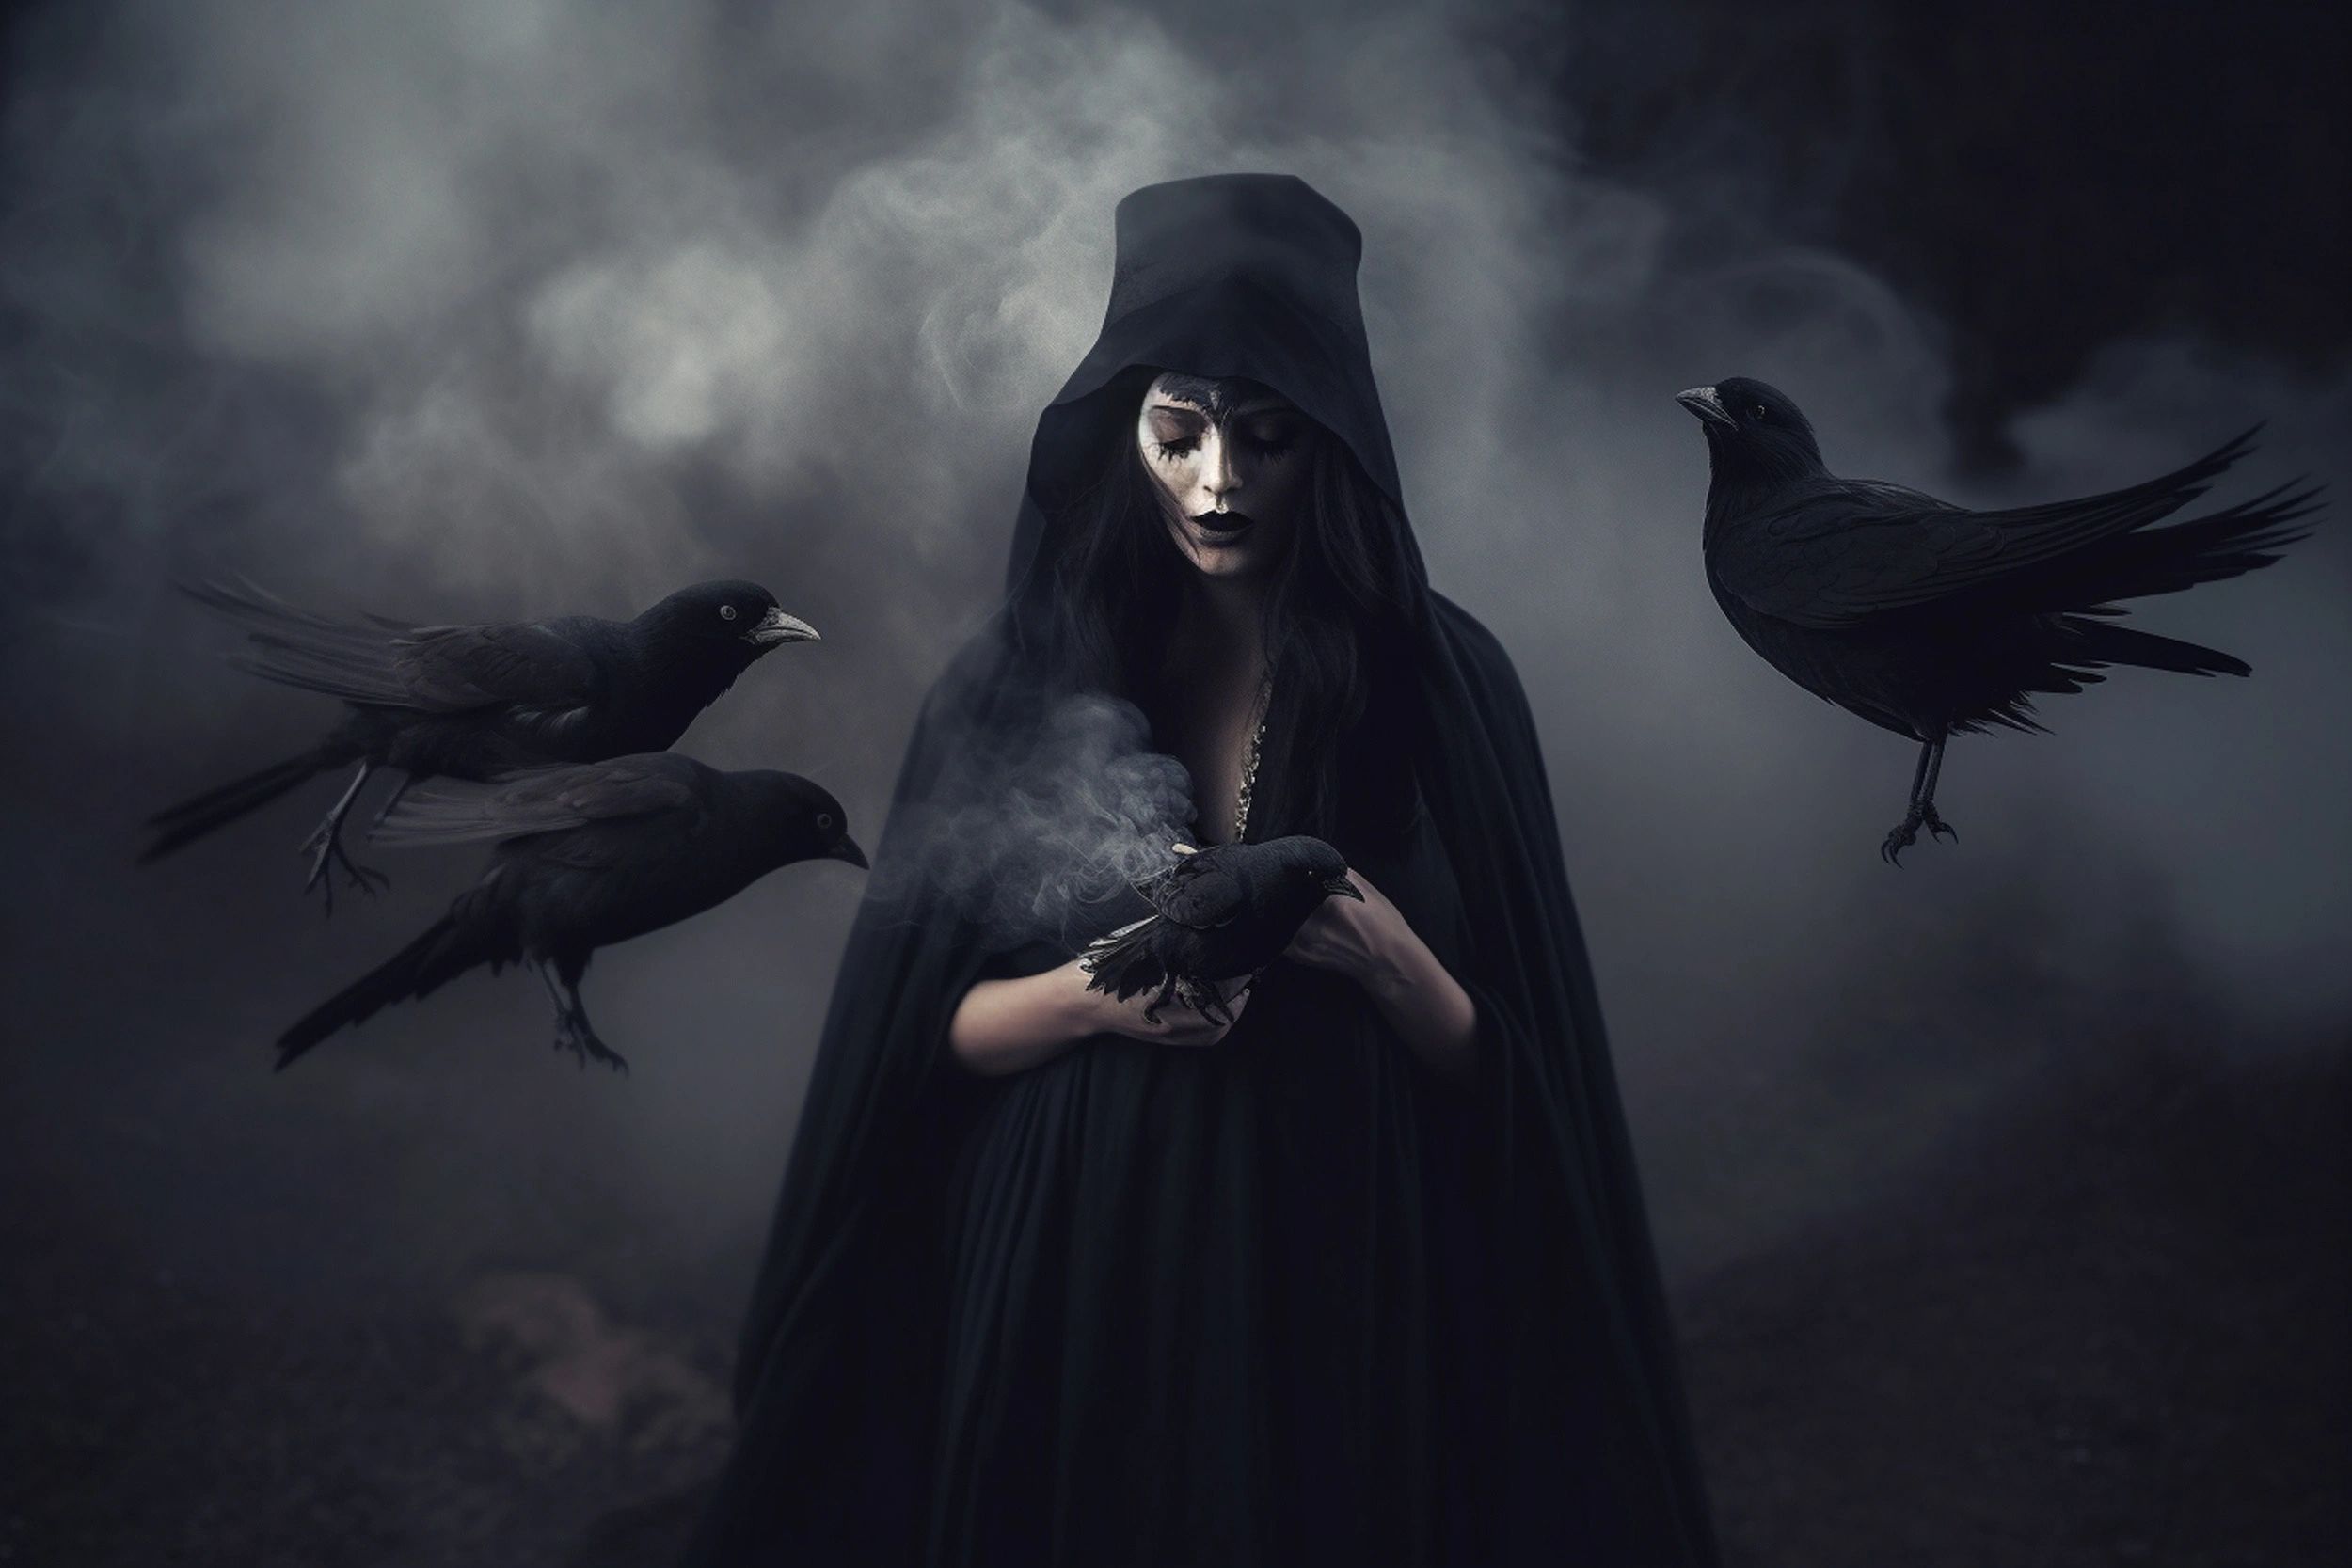 The Death Witch’s Mother